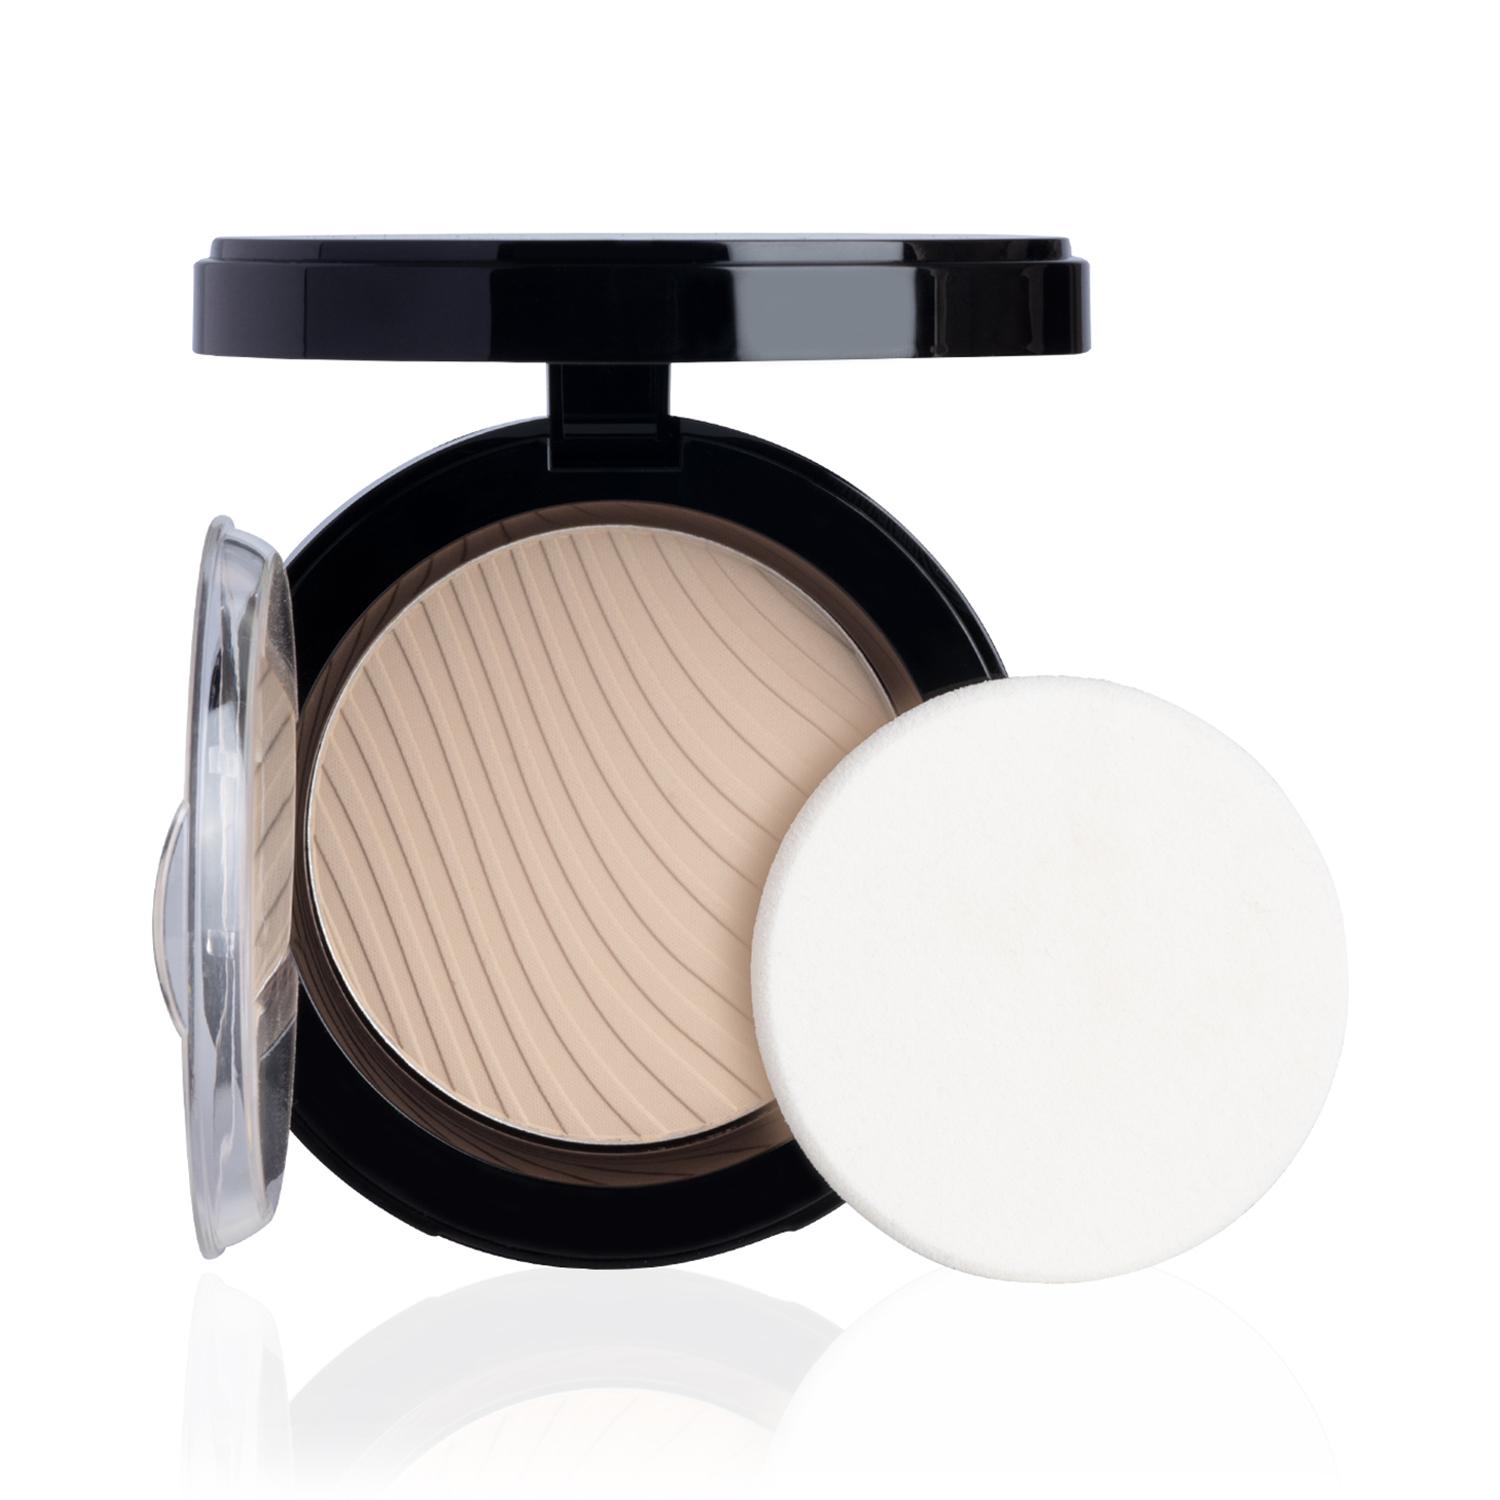 PAC Take Cover Compact Powder - 01 Light Fairy (7.85g)